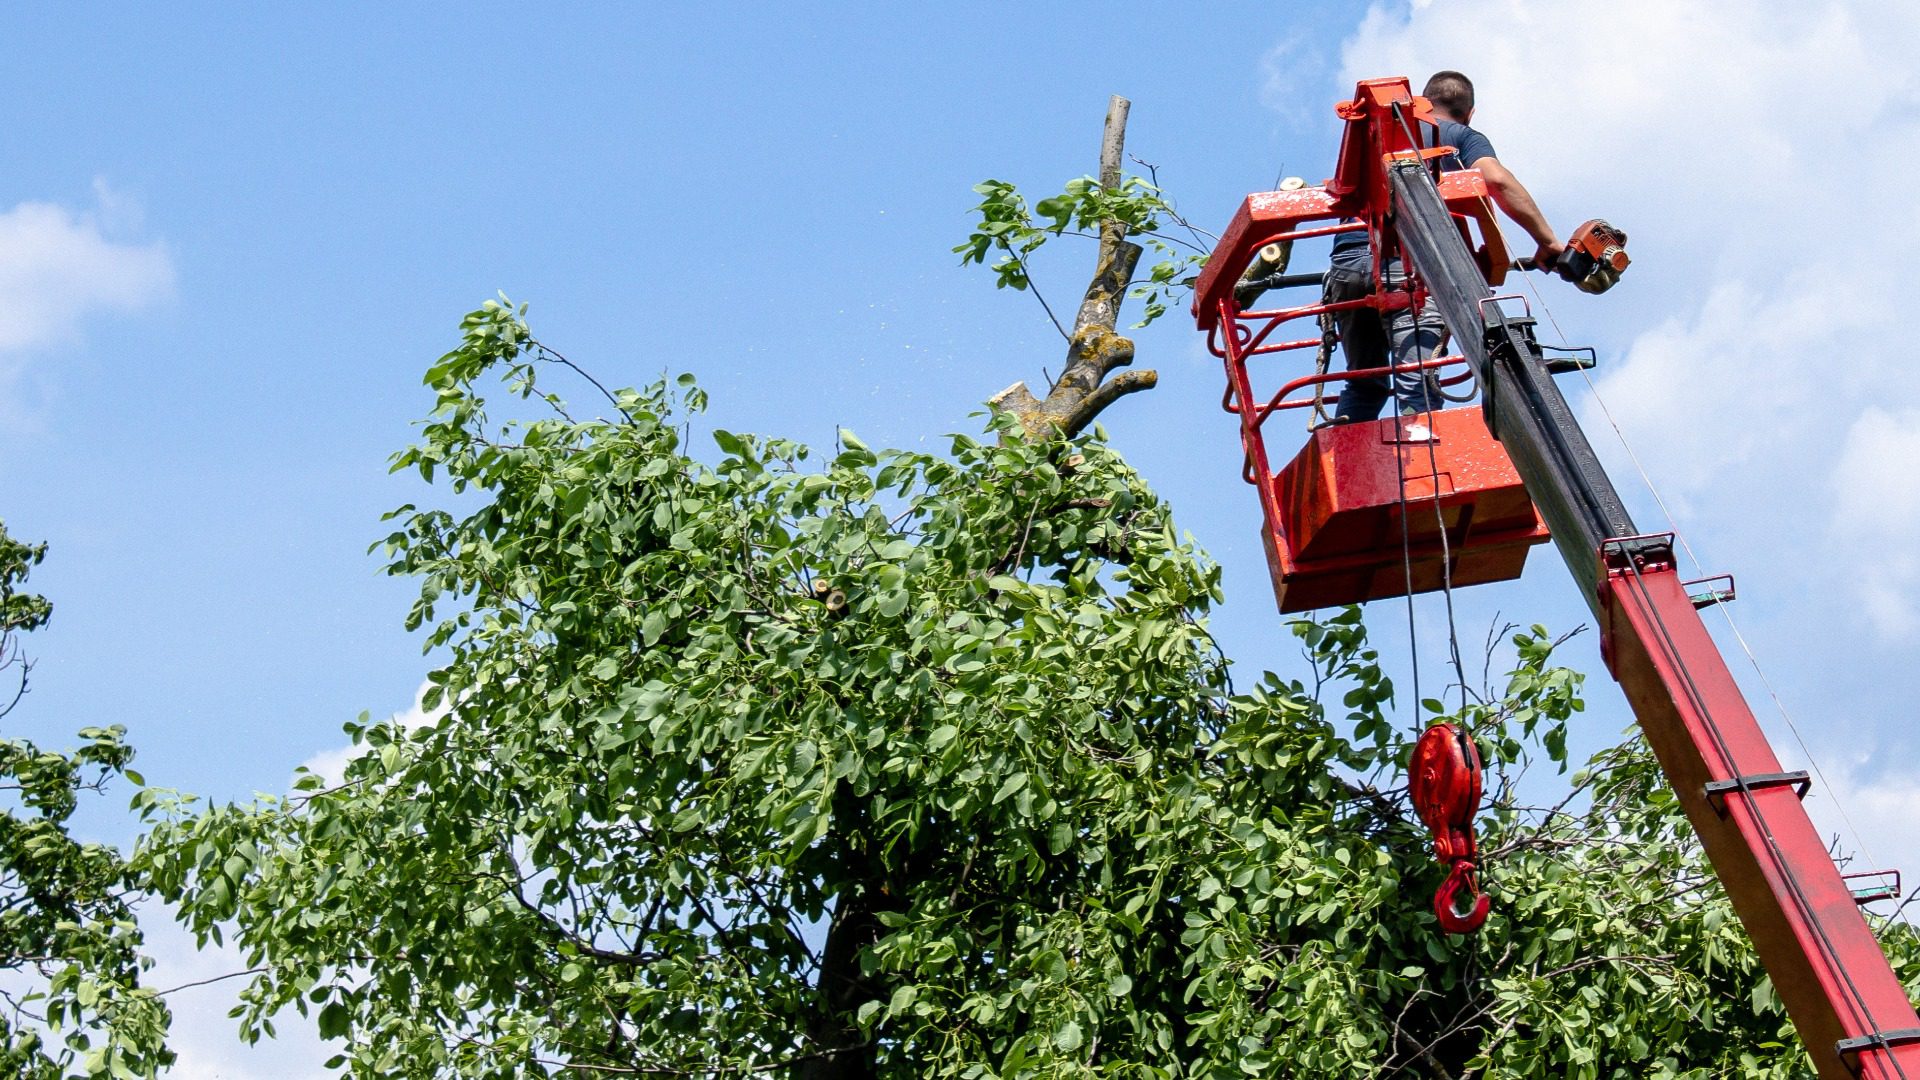 Tree pruning and sawing by a man with a chainsaw are standing on the platform of a mechanical chair lift between the branches of an old large tree.